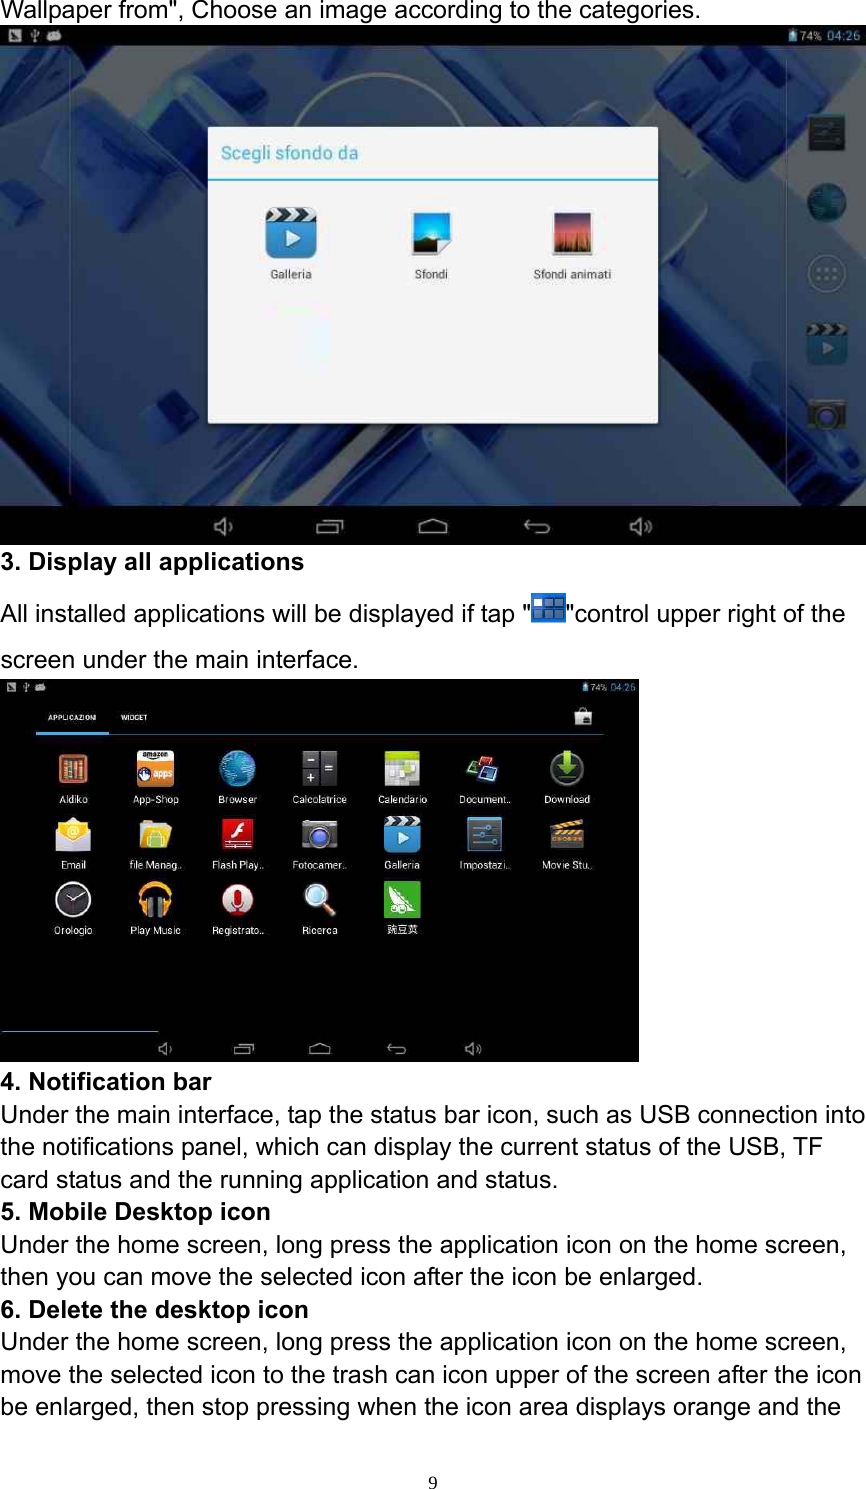  9Wallpaper from&quot;, Choose an image according to the categories.  3. Display all applications   All installed applications will be displayed if tap &quot; &quot;control upper right of the screen under the main interface.    4. Notification bar   Under the main interface, tap the status bar icon, such as USB connection into the notifications panel, which can display the current status of the USB, TF card status and the running application and status.   5. Mobile Desktop icon   Under the home screen, long press the application icon on the home screen, then you can move the selected icon after the icon be enlarged.   6. Delete the desktop icon   Under the home screen, long press the application icon on the home screen, move the selected icon to the trash can icon upper of the screen after the icon be enlarged, then stop pressing when the icon area displays orange and the 